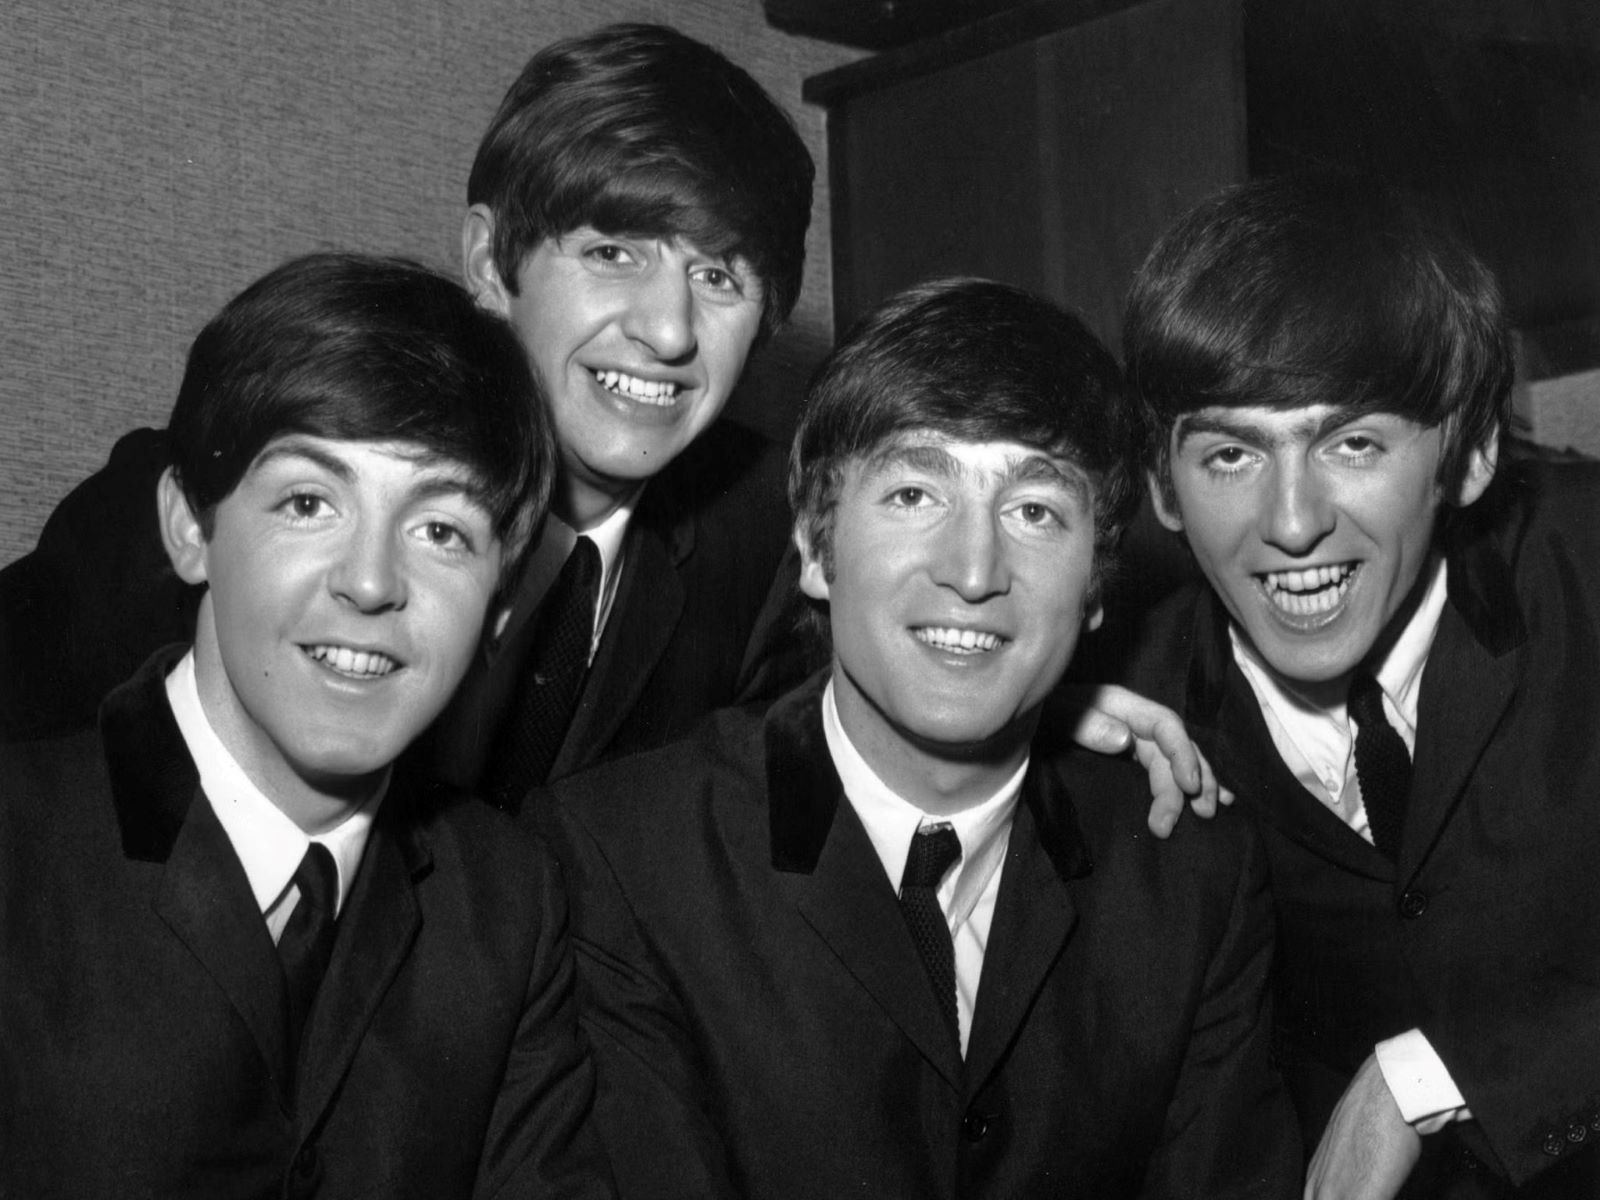 What Record Label Did The Beatles Form In The 1960S?